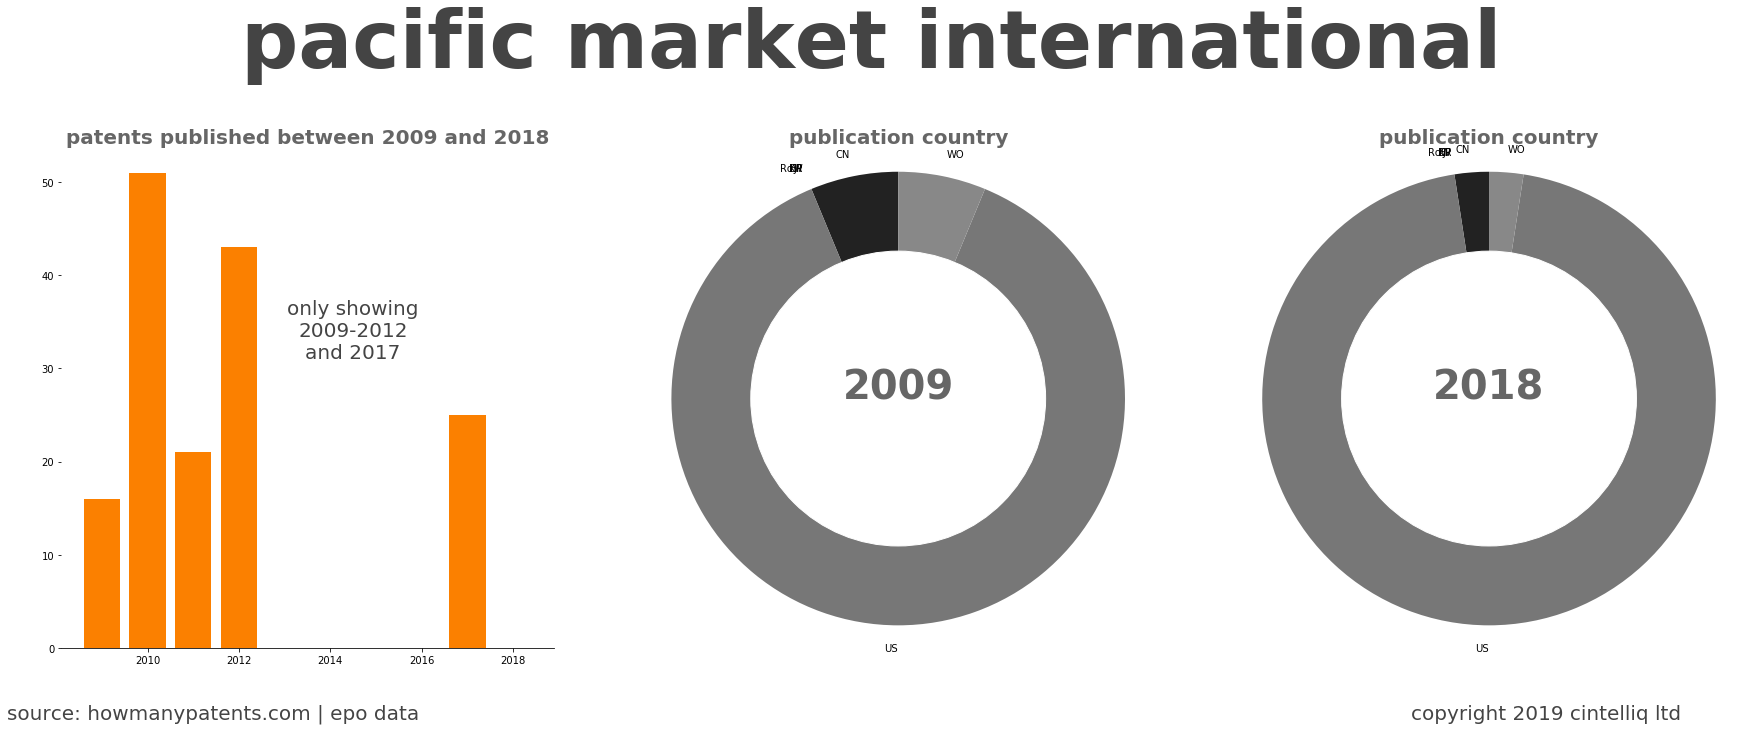 summary of patents for Pacific Market International